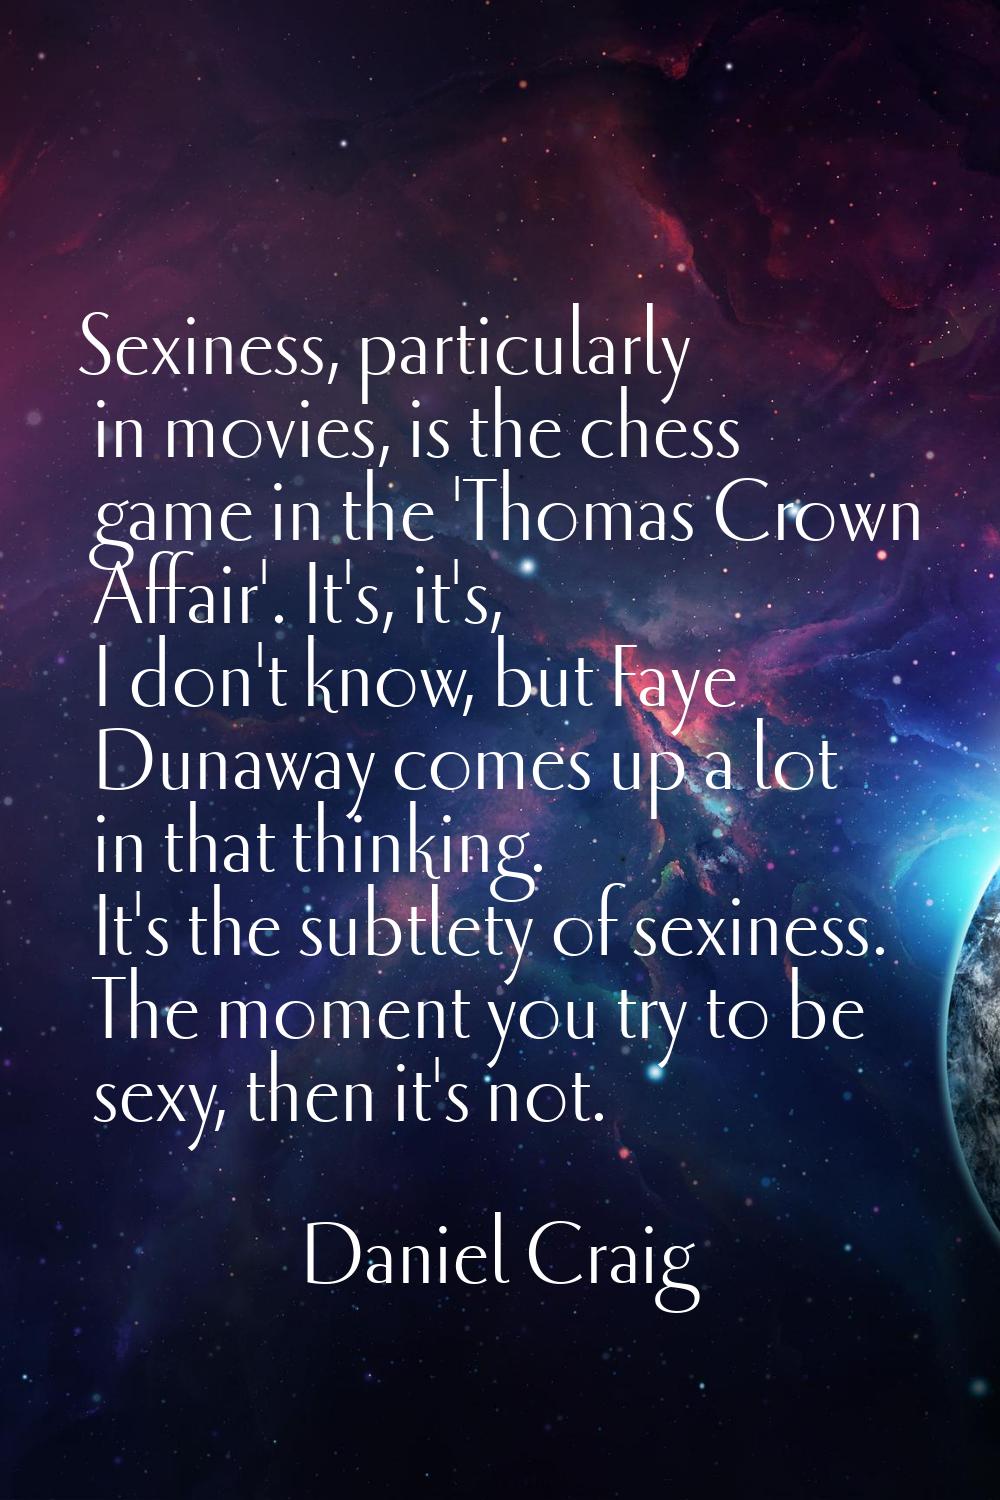 Sexiness, particularly in movies, is the chess game in the 'Thomas Crown Affair'. It's, it's, I don